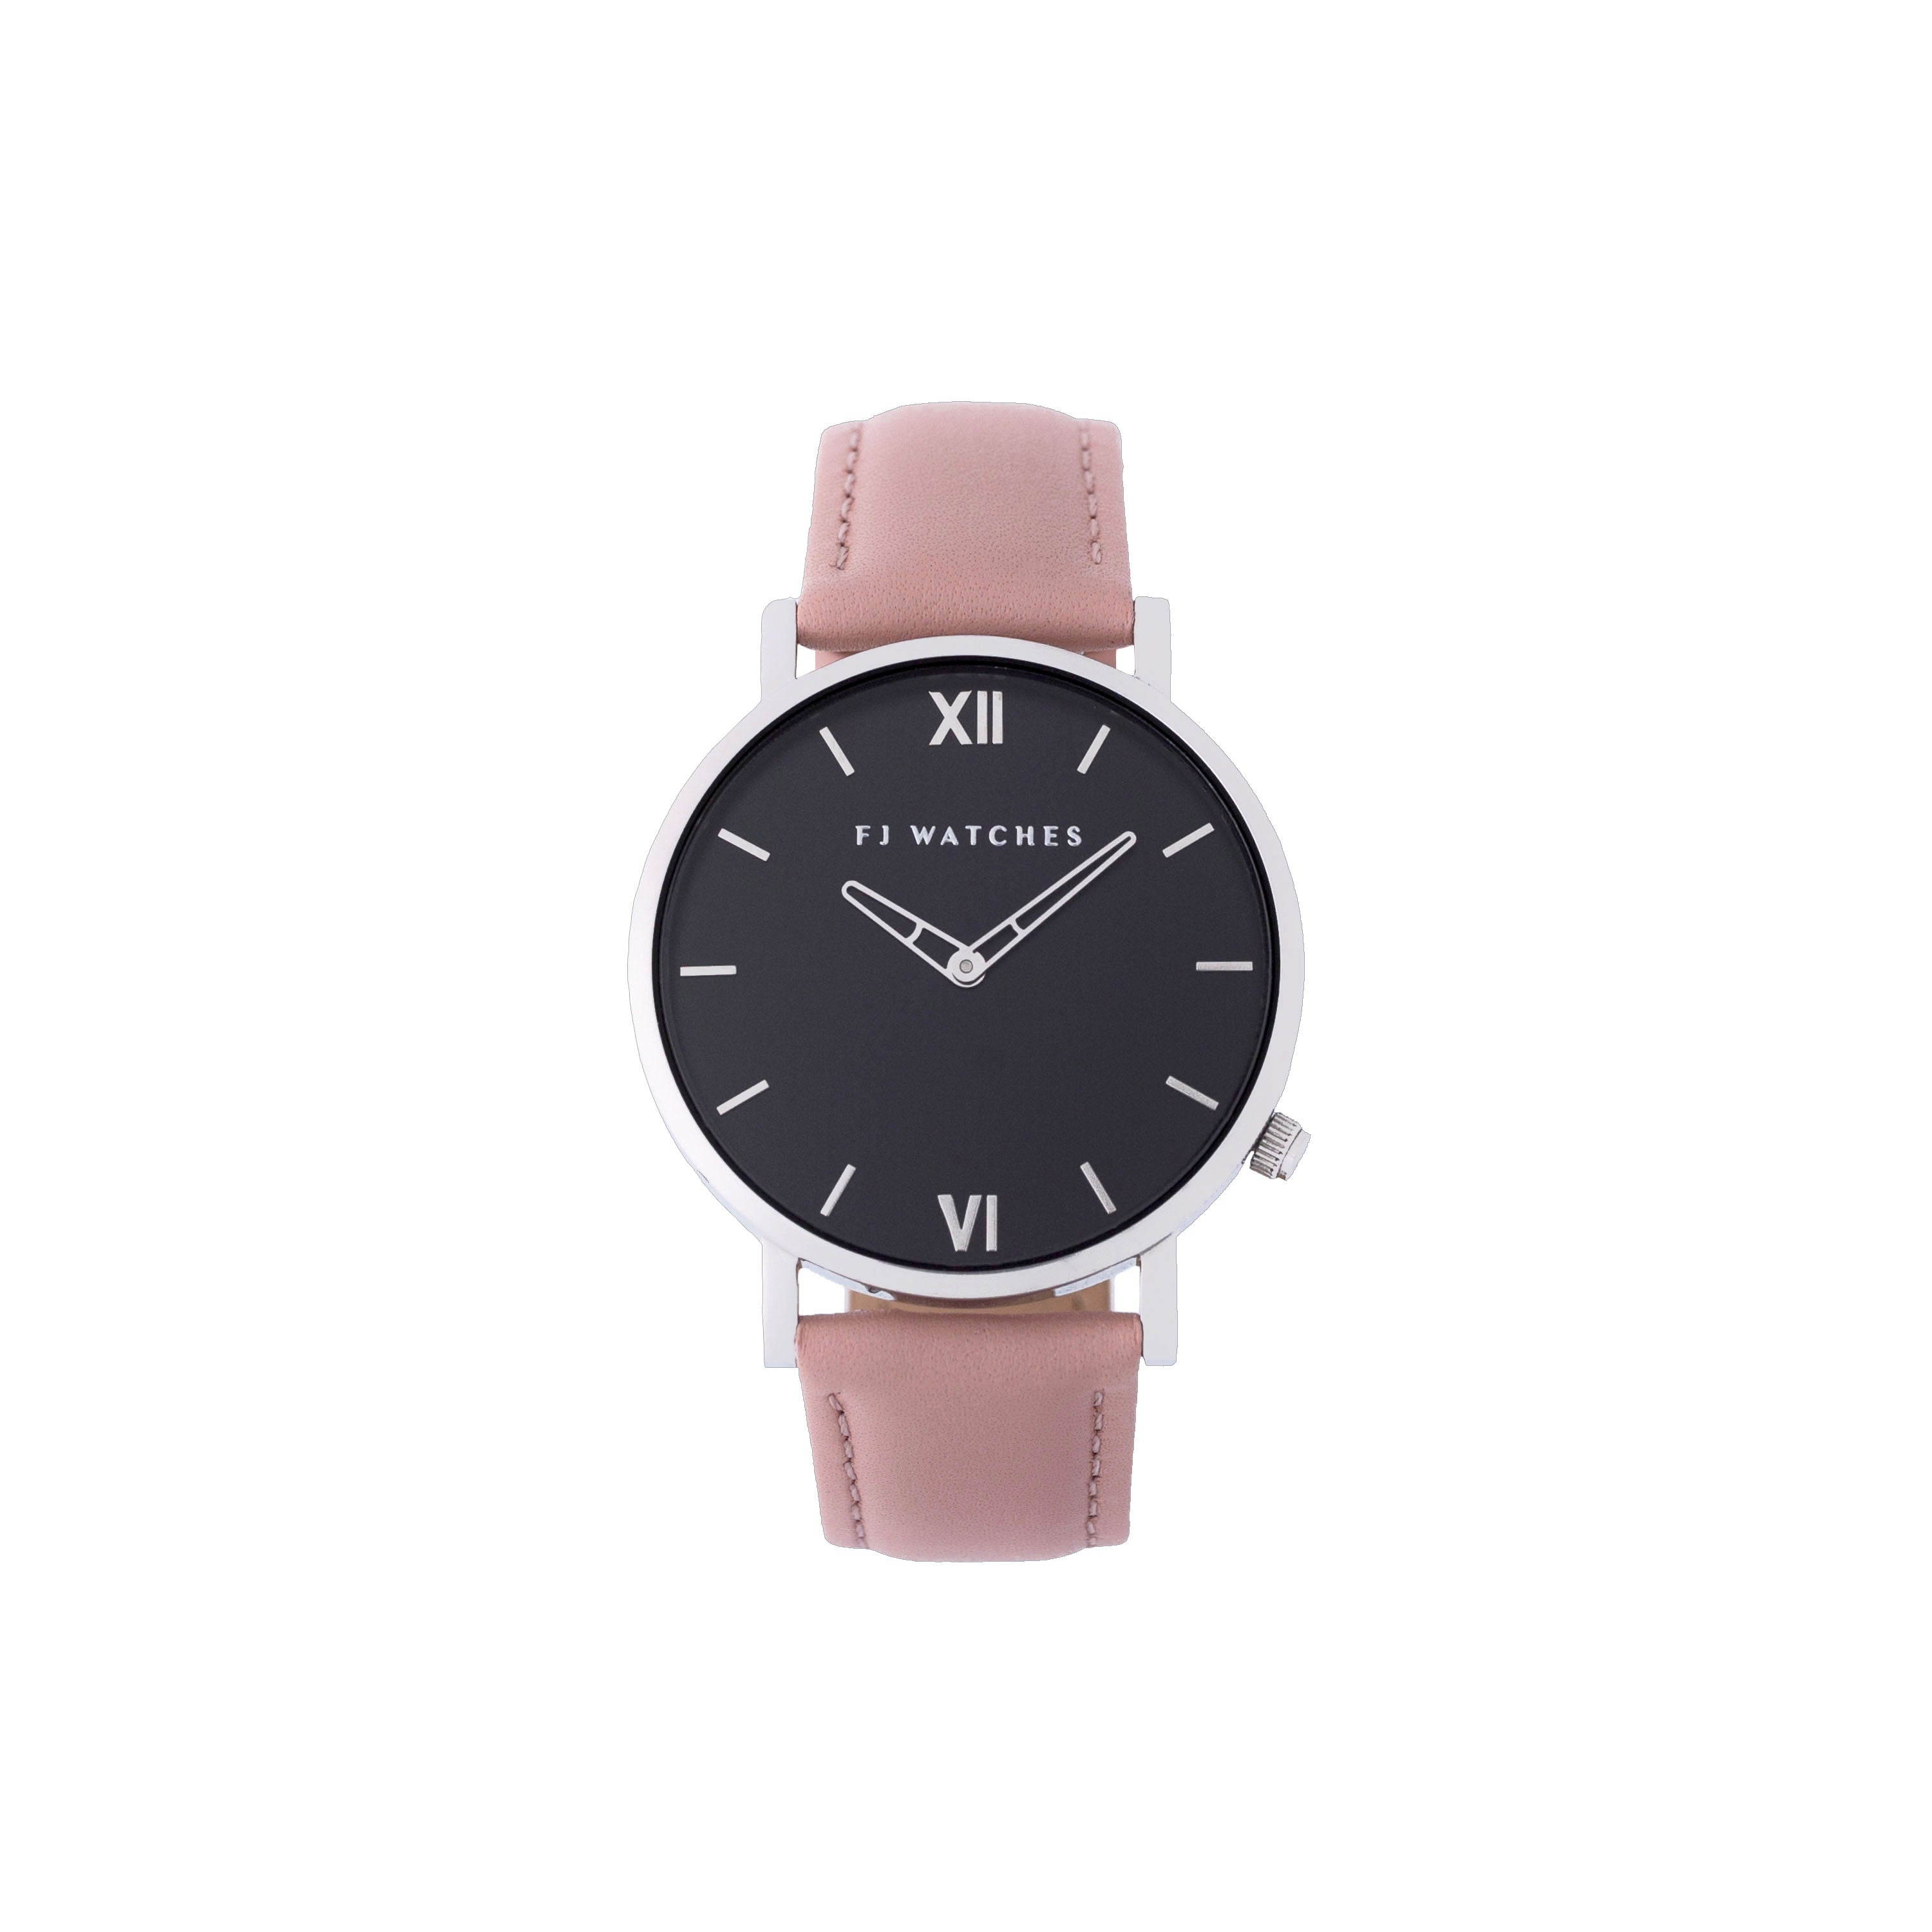 Discover Silver moon, a 36 mm women's watch from Five Jwlry with a black and silver dial. This one can be paired with a wide variety of leather colors, such as black, white, pink, red, blue, gray, tan, brown and beige!